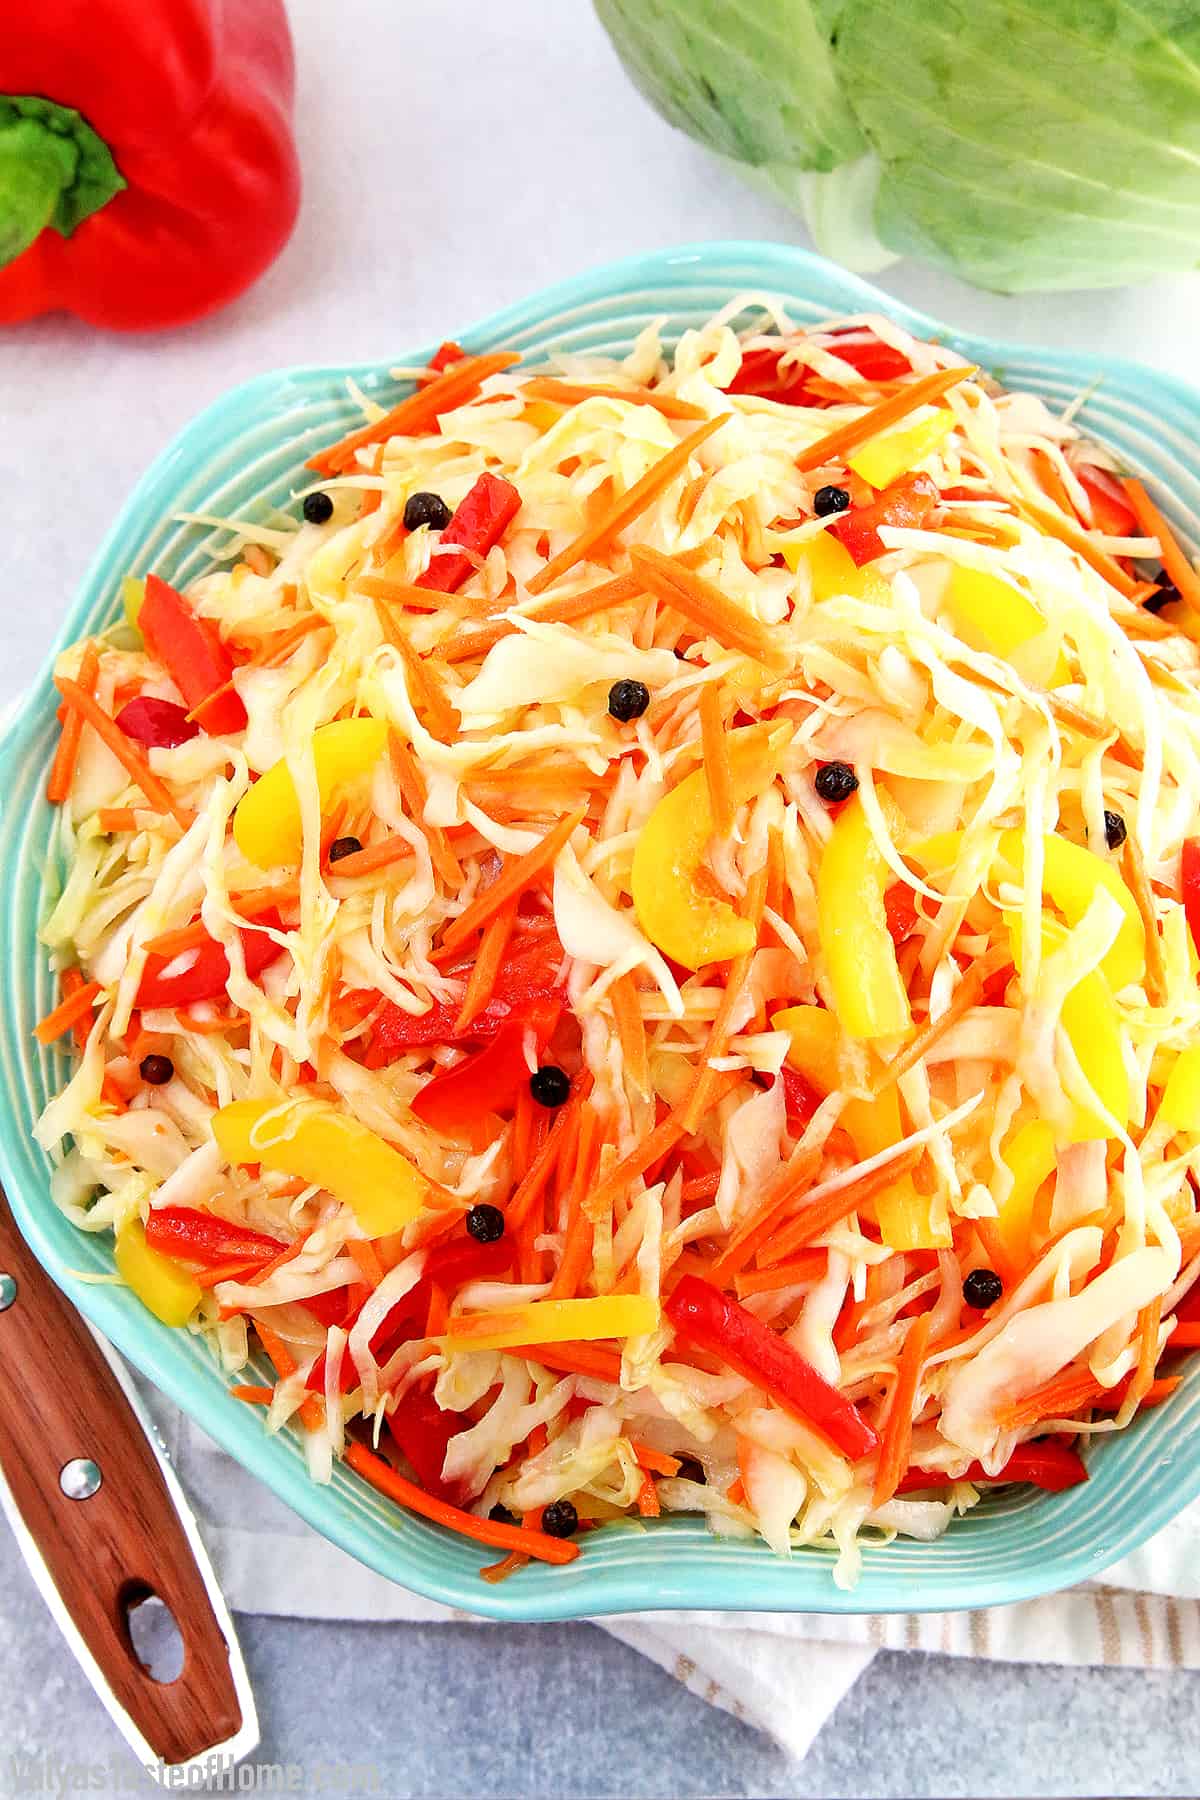 This Cabbage Carrots and Peppers Salad recipe is not one of those salads that you really taste the sharpness of fresh vegetables. It tastes more like a marinated salad and has a bit of a sweet and sour taste to it. The best thing I like about this salad is that you can make it ahead of time which helps avoid those last-minute preparation rushes.  #cabbagecarrotspepperssalad #marinatedsalad #easymarinatedvegetablesalad #valyastasteofhome